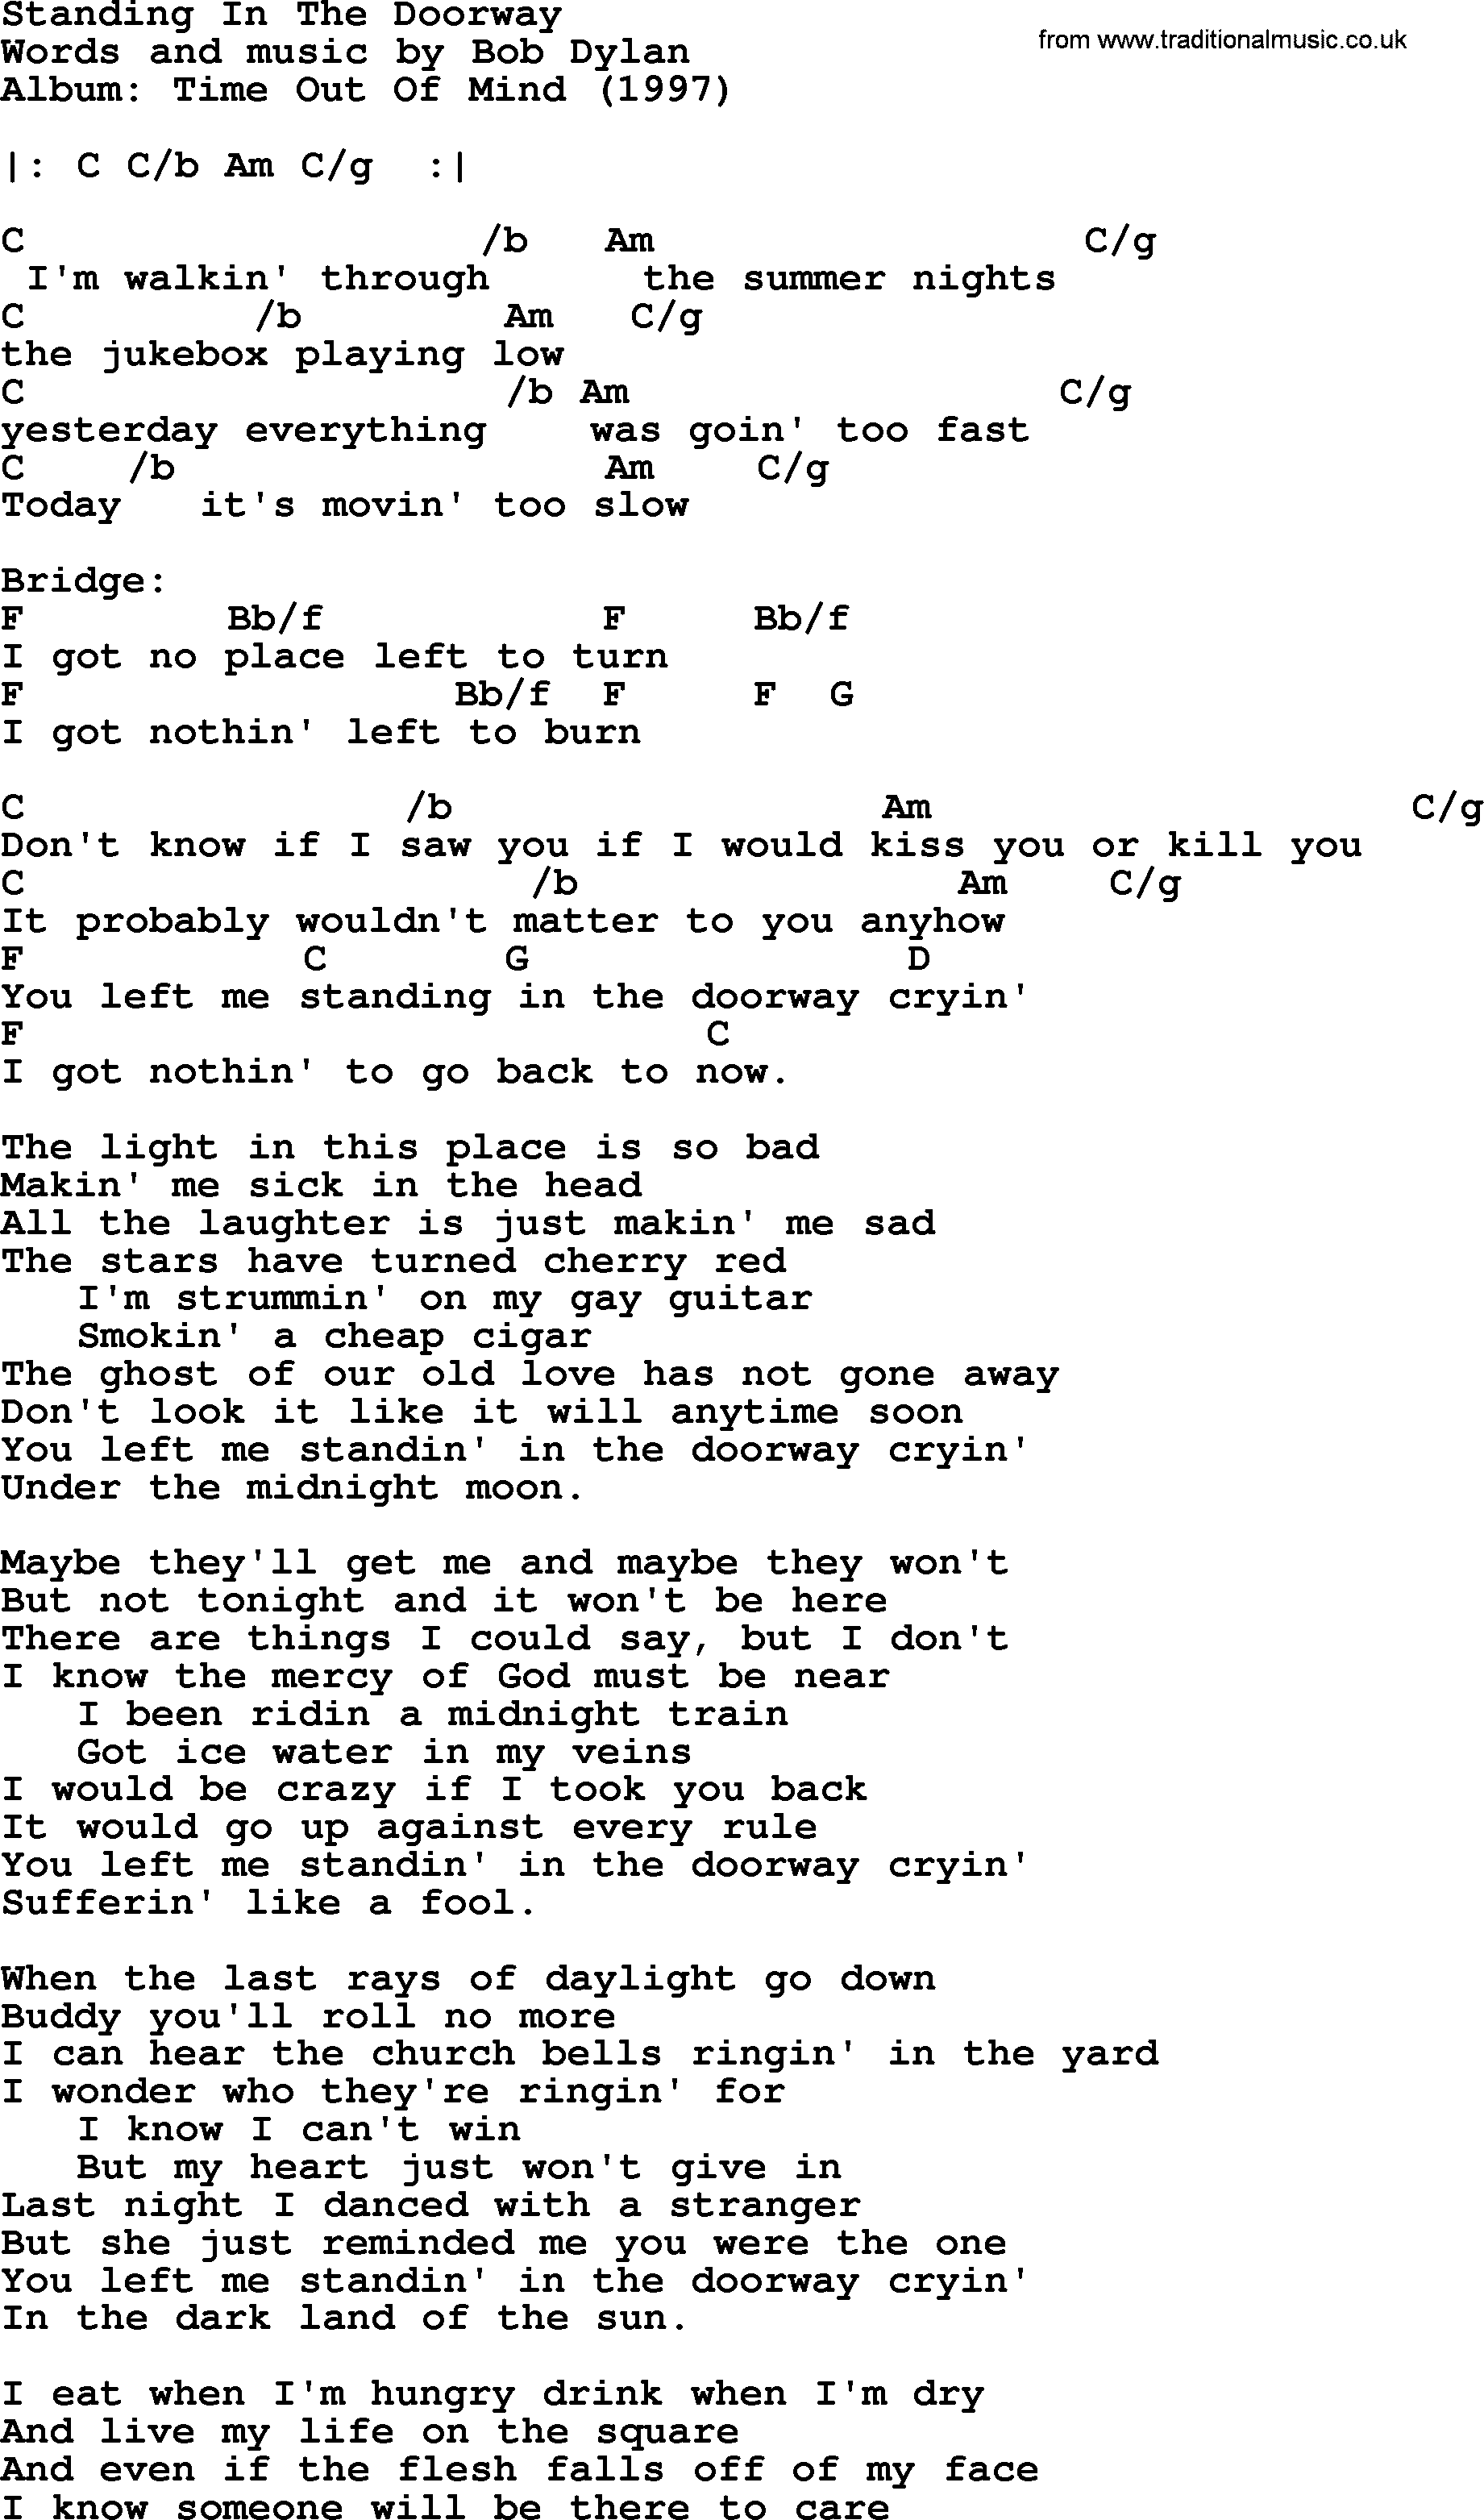 Bob Dylan song, lyrics with chords - Standing In The Doorway